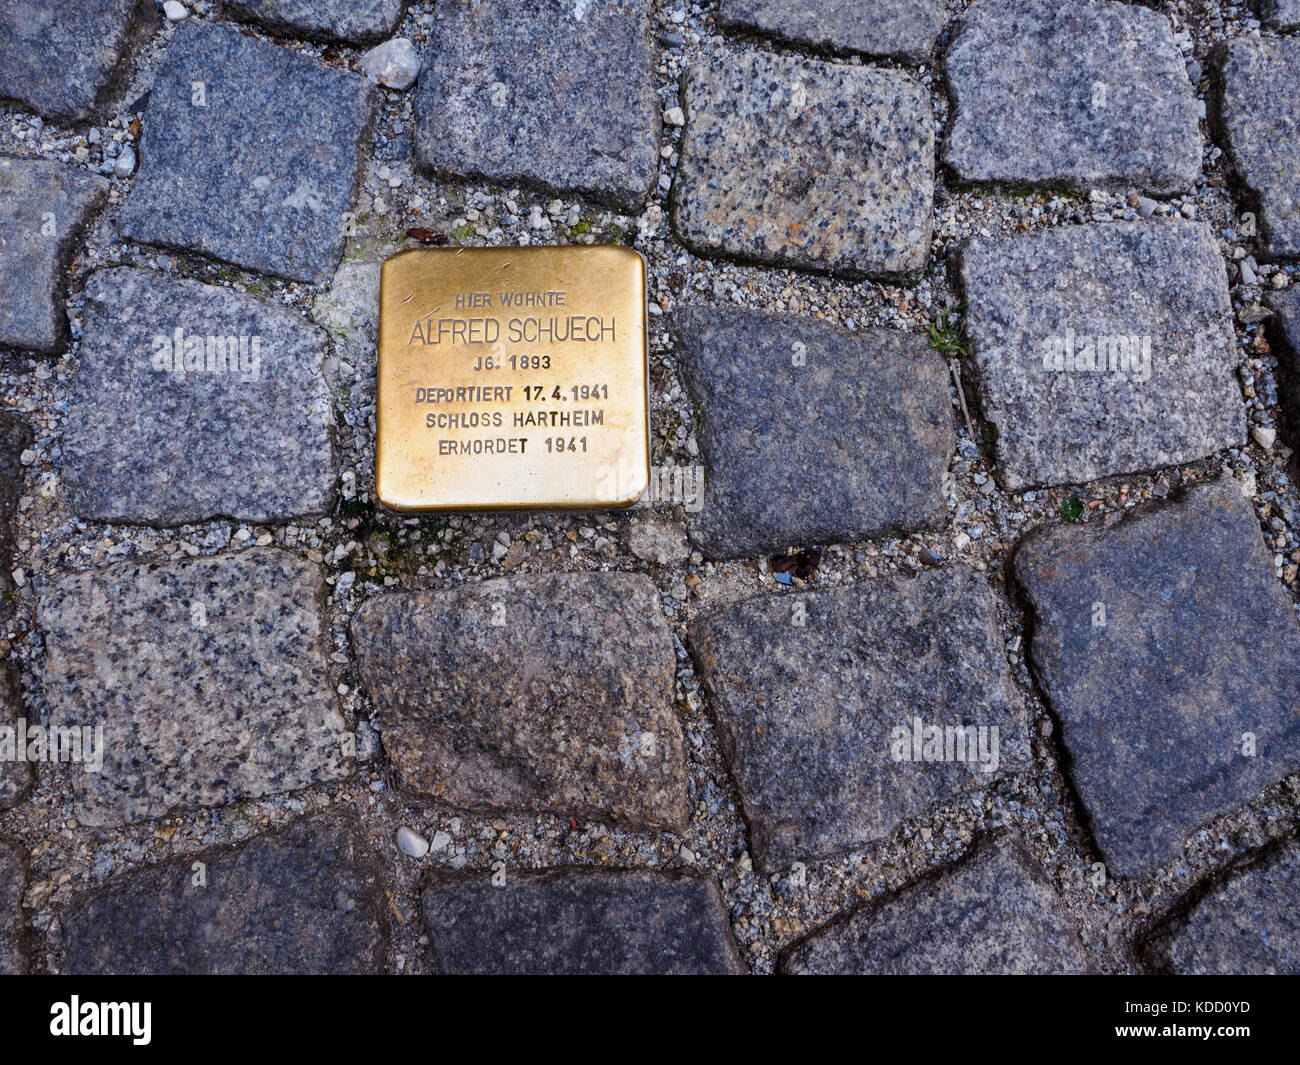 AUSTRIA - in August 2015: Stumbling Blocks in the streets of Salzburg. To commemorate the names of people who were persecuted and murdered during the  Stock Photo